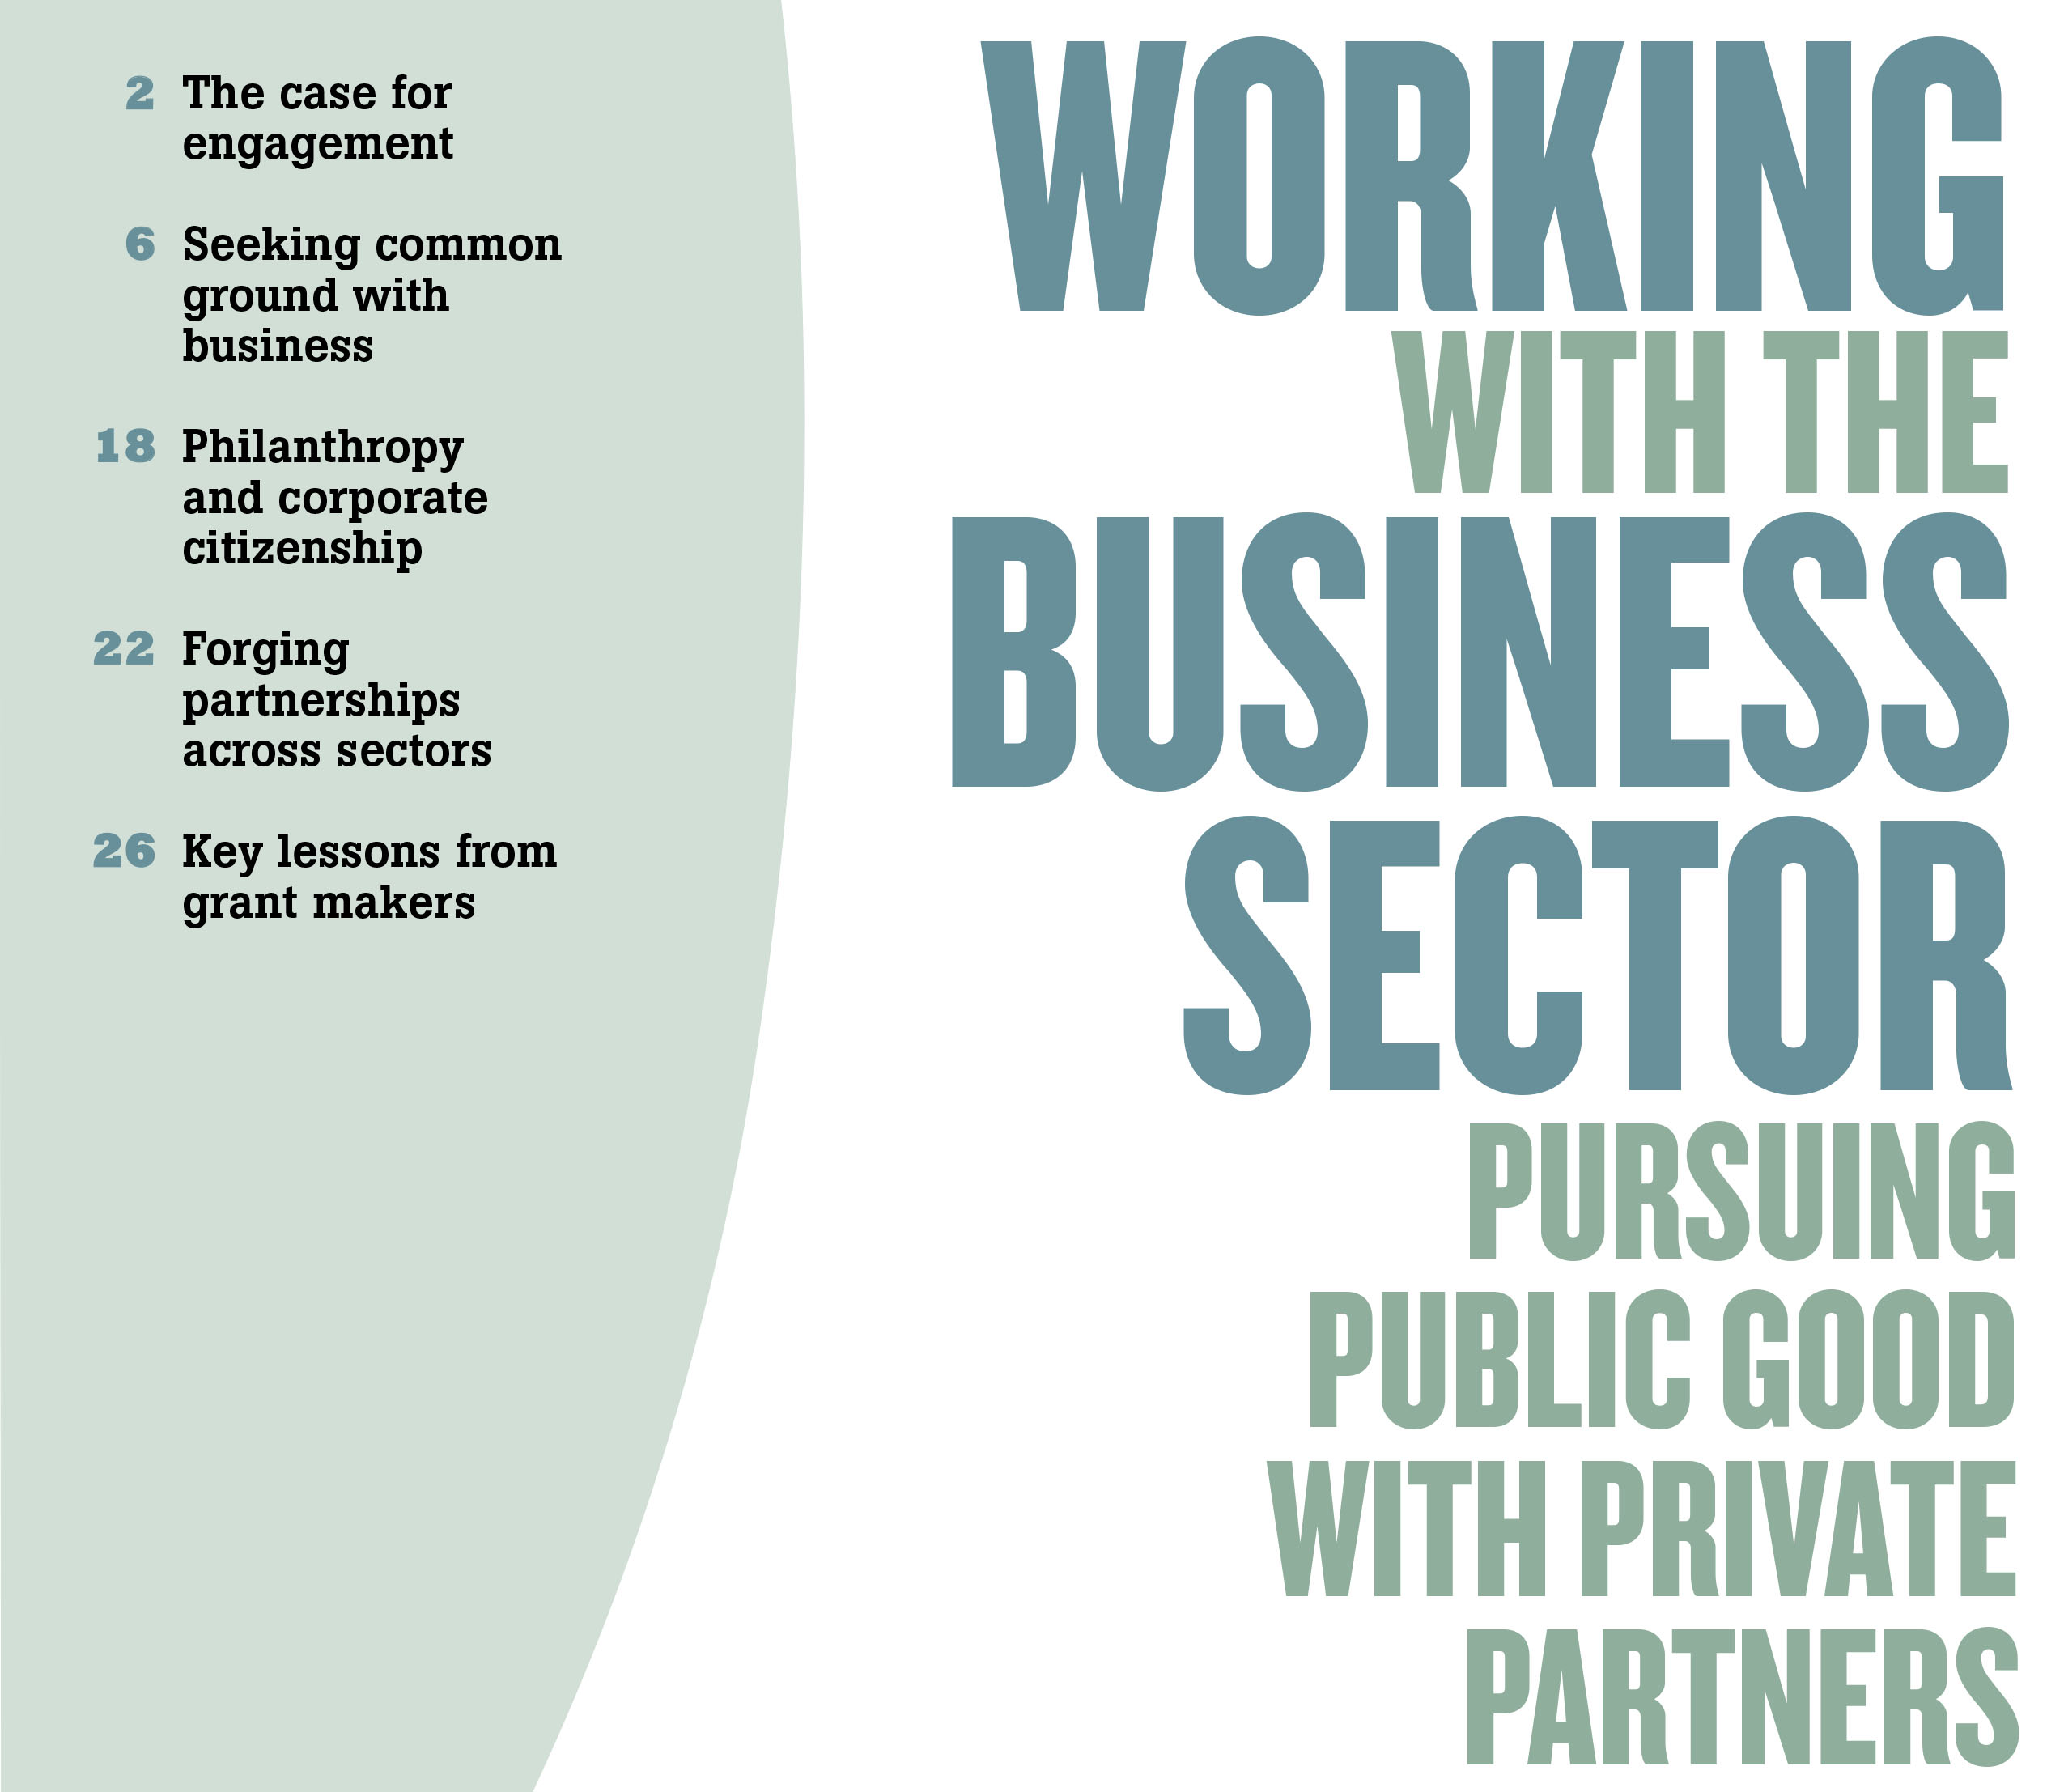 Working with the Business Sector